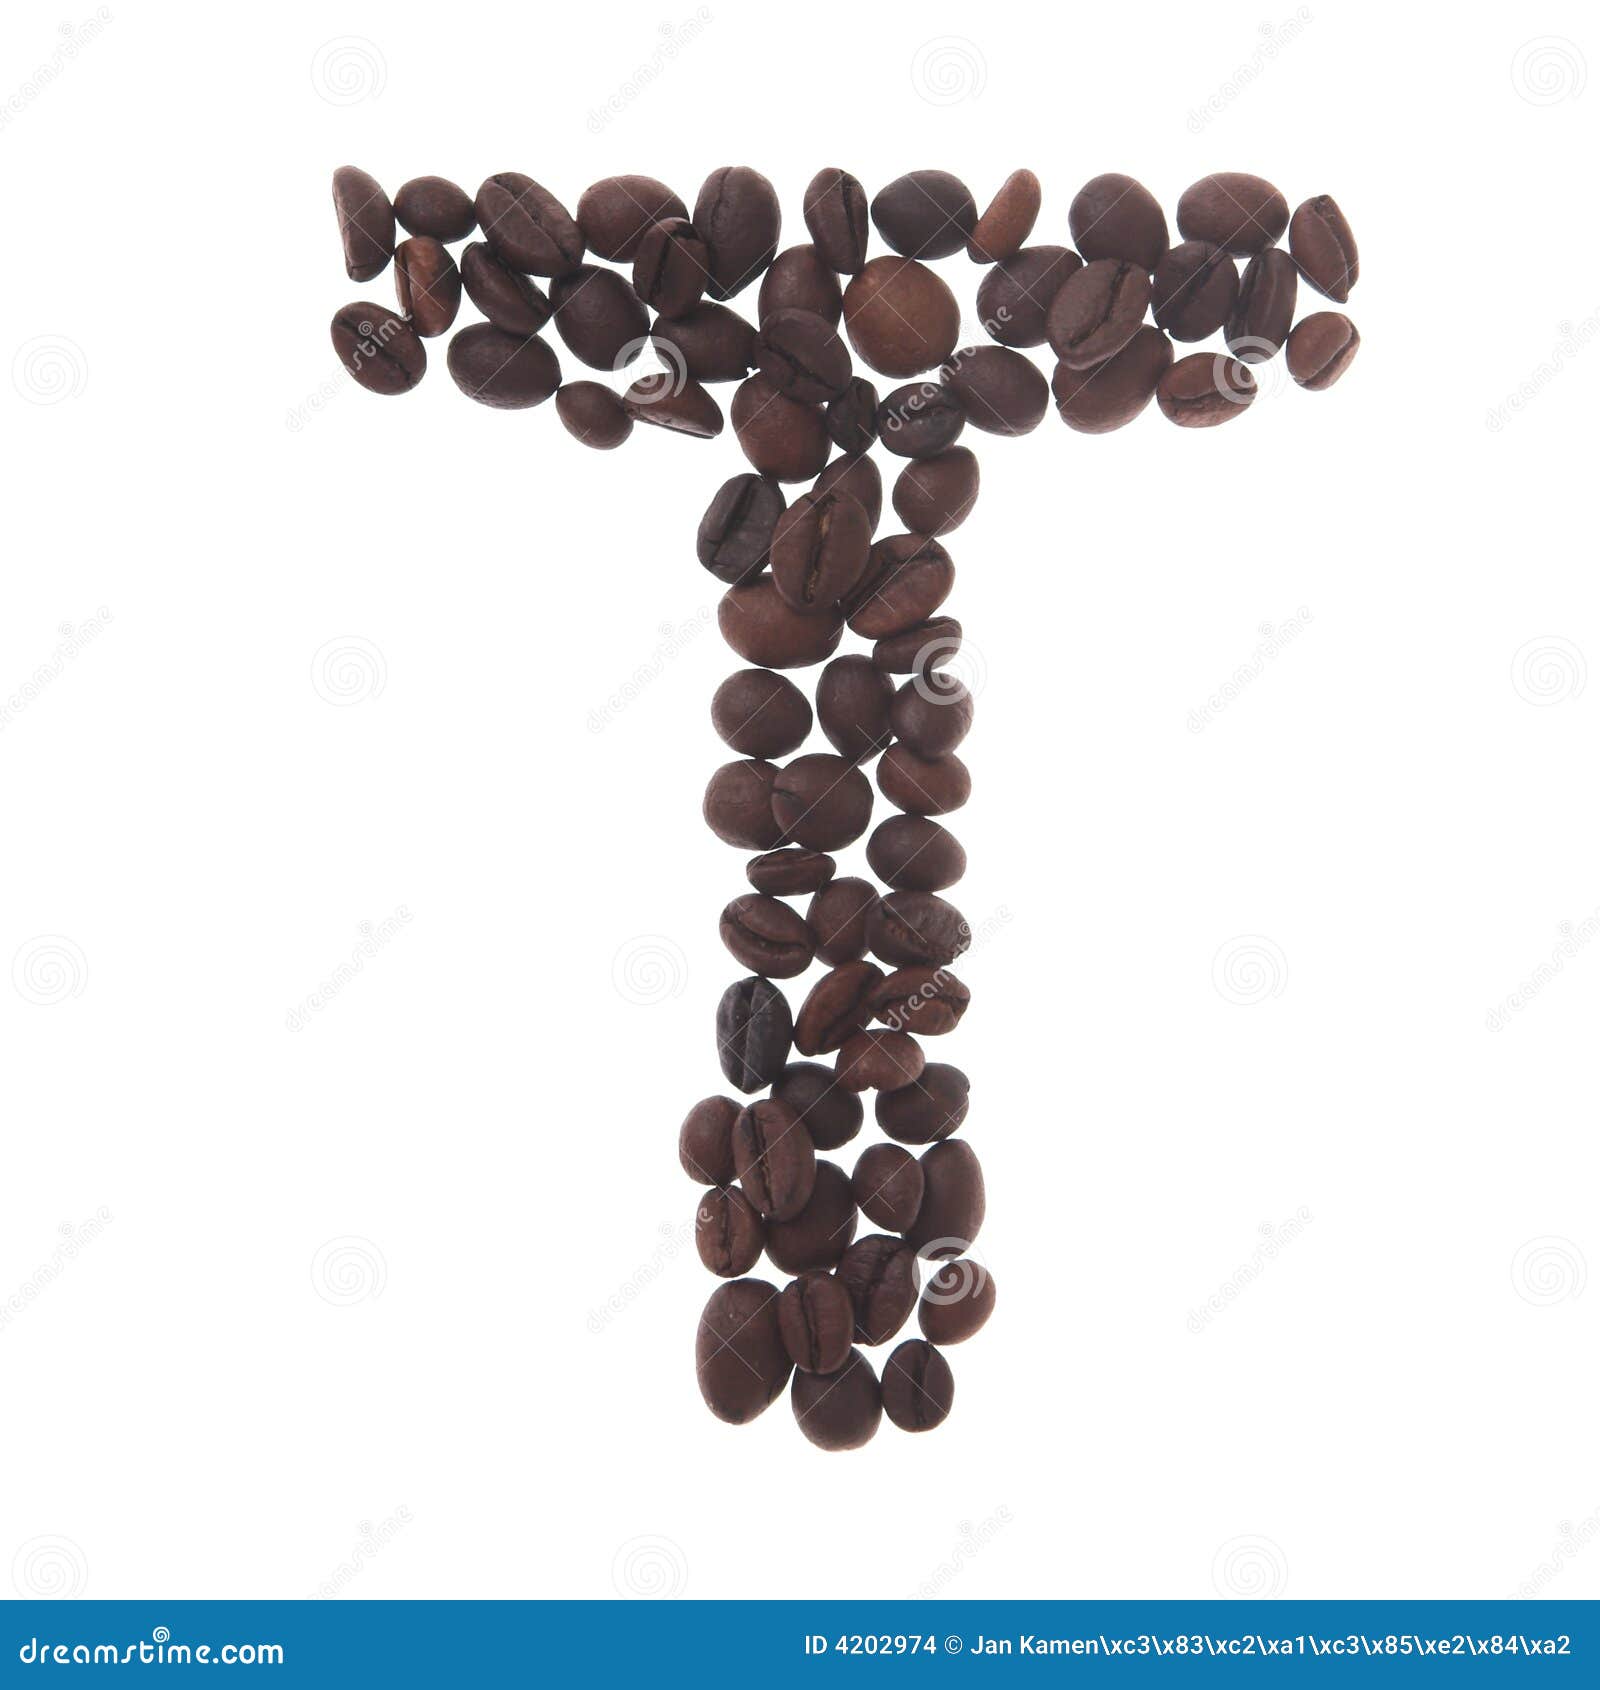 stock images coffee letter t image